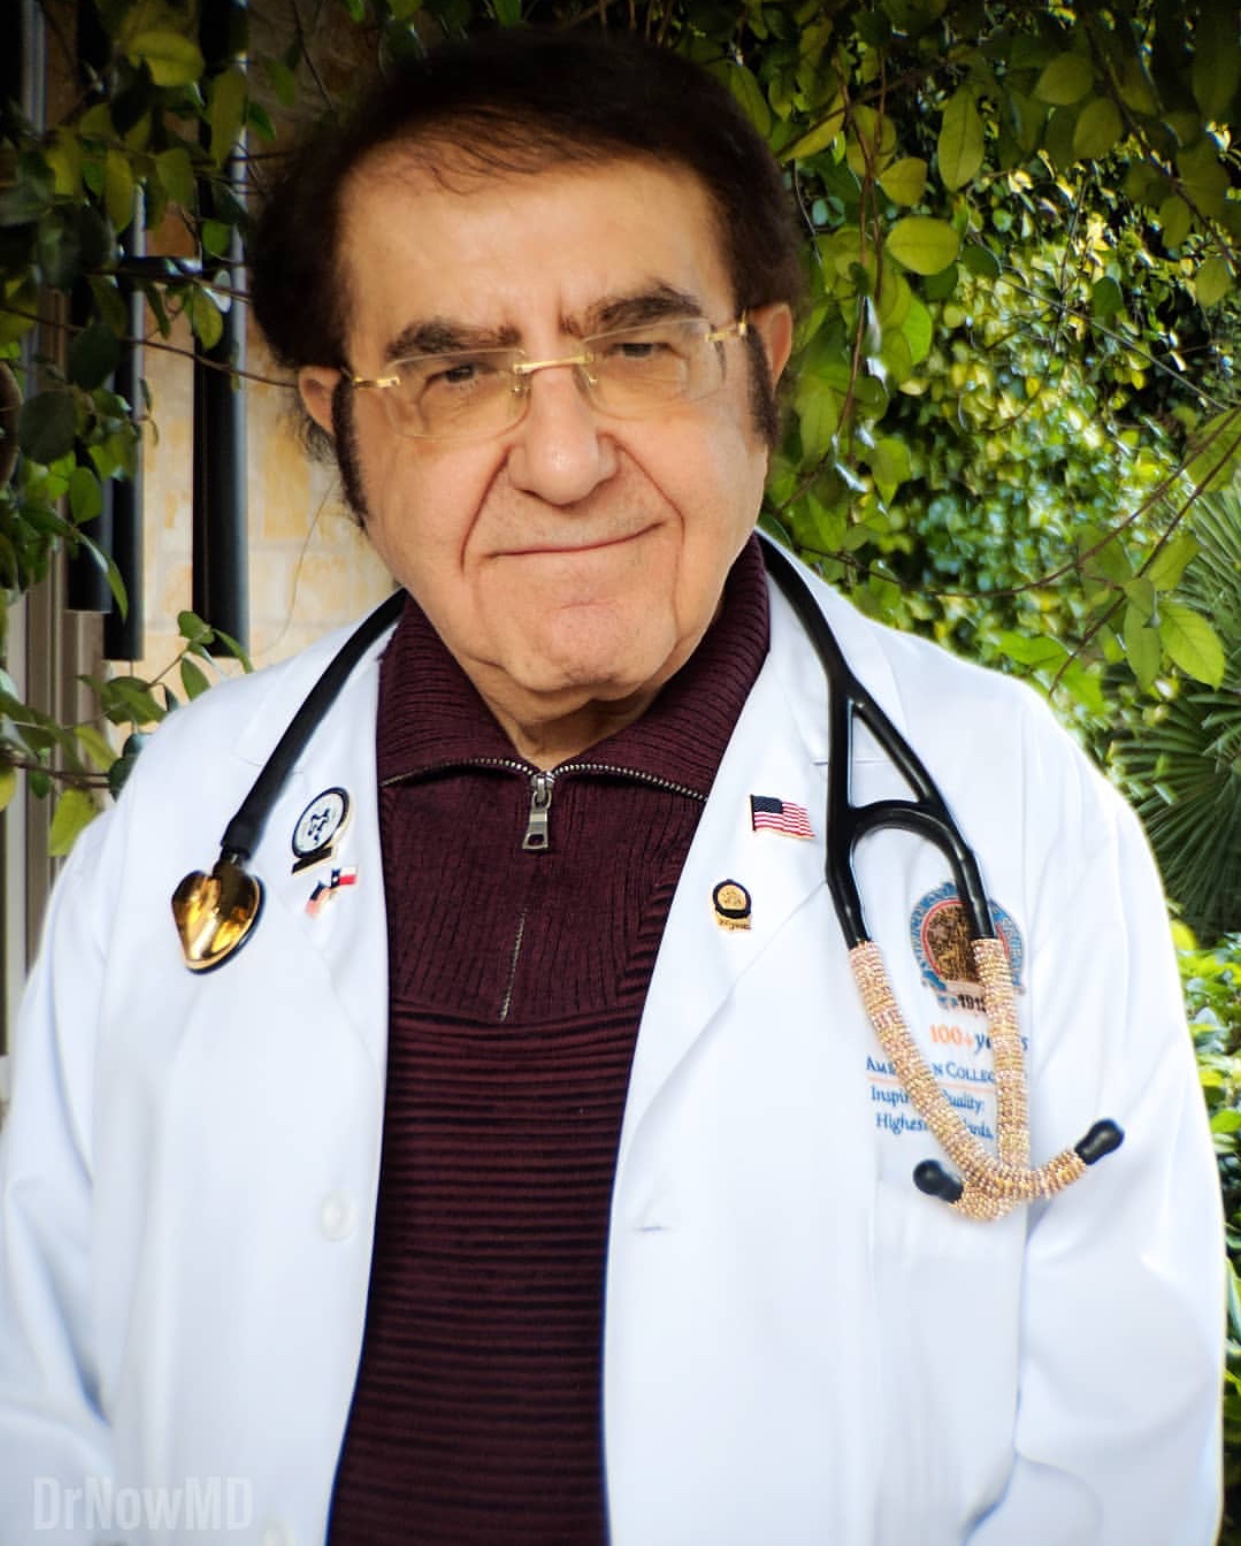 Dr. Younan Nowzaradan of 'My 600-lb Life,' a Weight-Loss Doctor